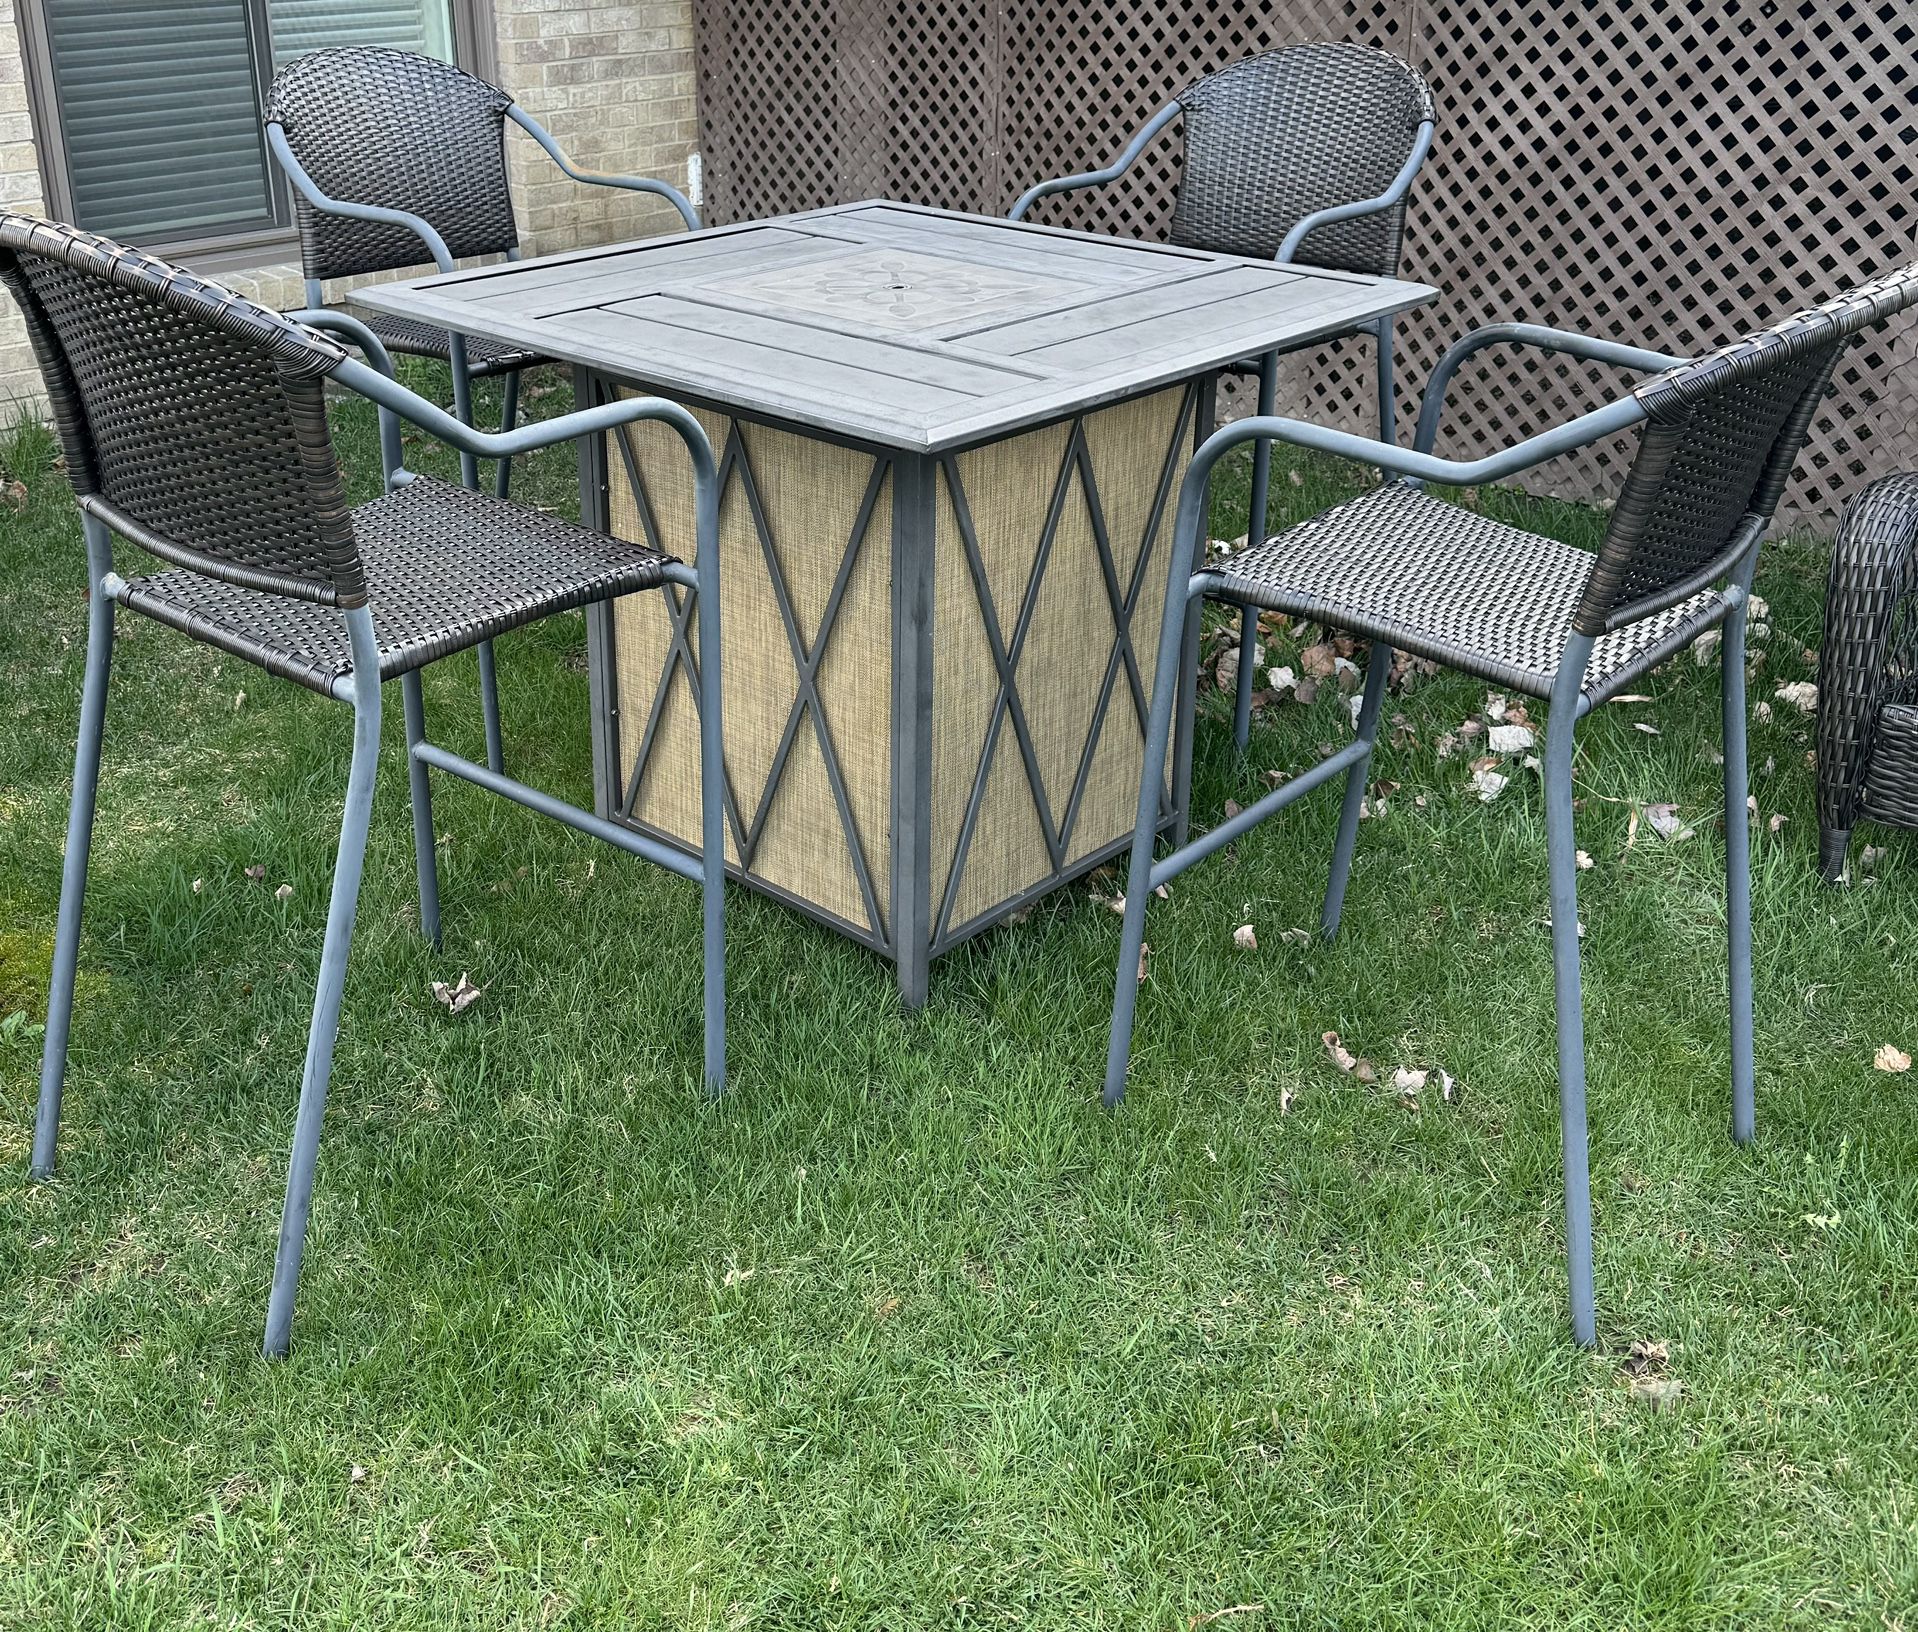 4 Seat Outdoor Patio Furniture With Bonfire Table.